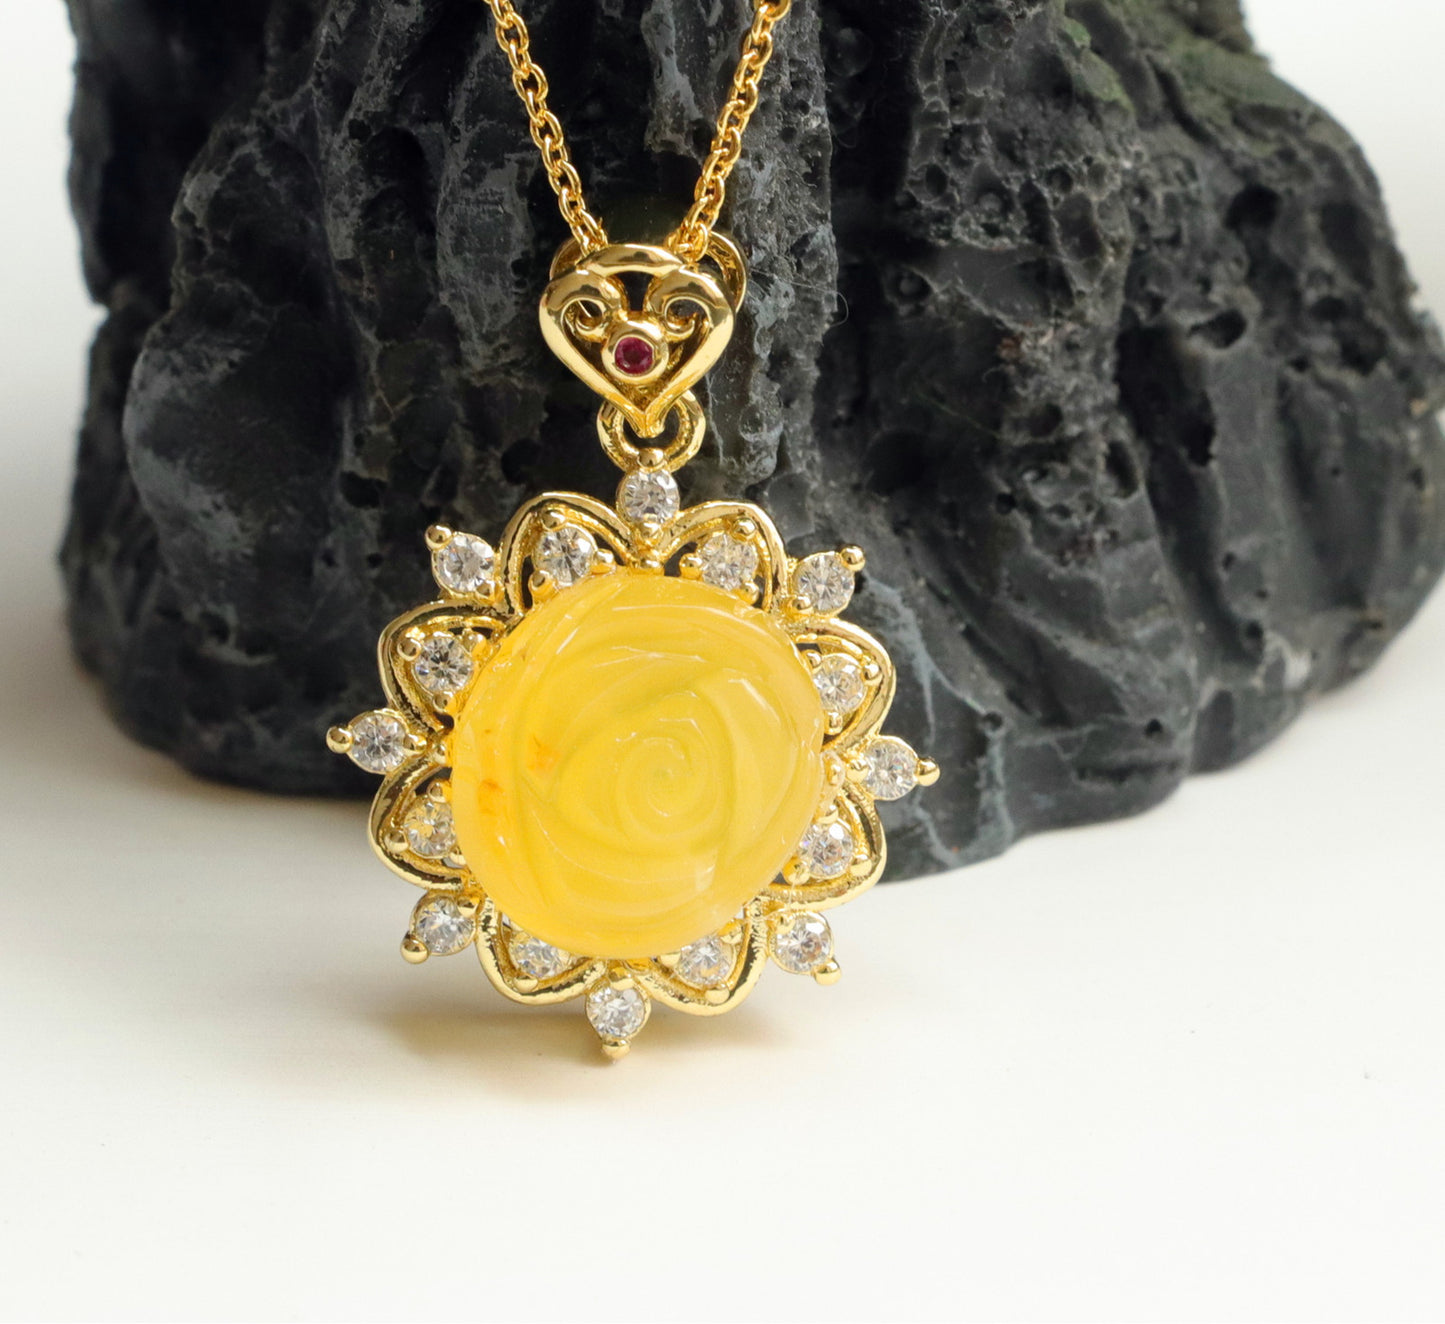 Amber Rose Necklace with Amber Beeswax Pendant and Zircon Flower Jewelry